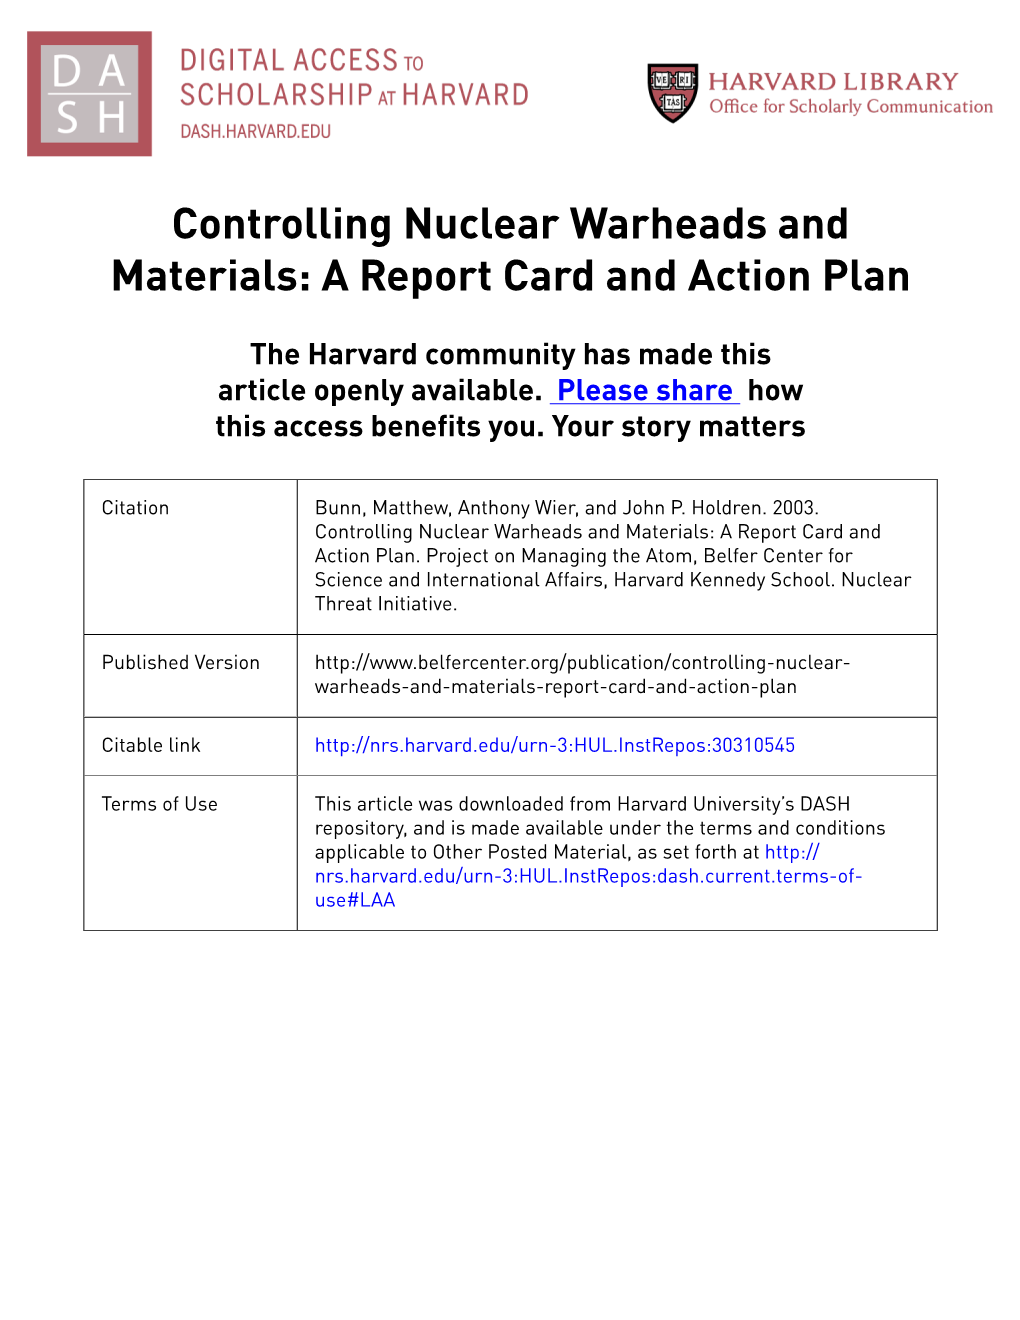 Controlling Nuclear Warheads and Materials: a Report Card and Action Plan